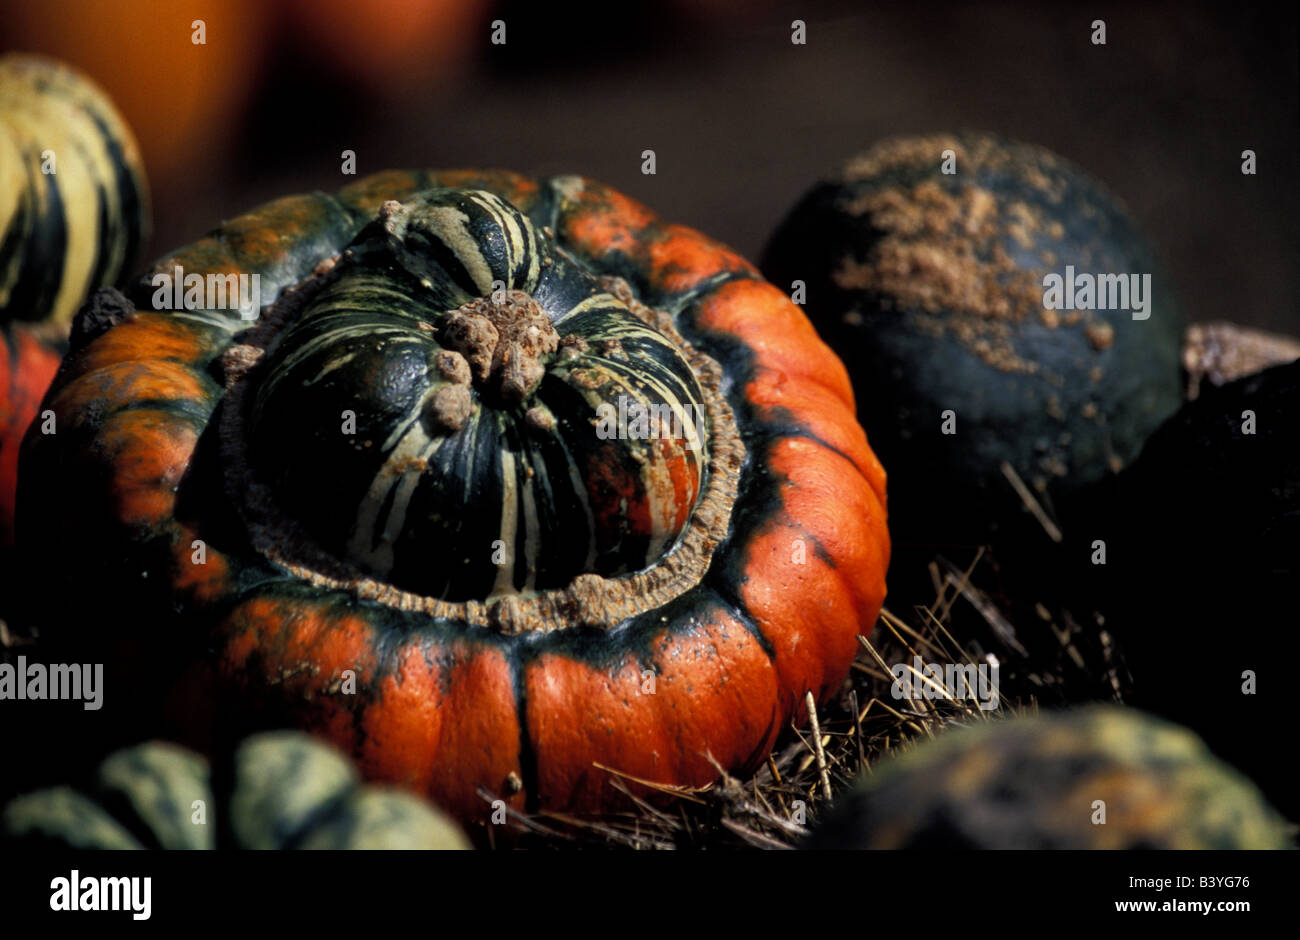 North America, United States, New England. Fall gourds. Stock Photo